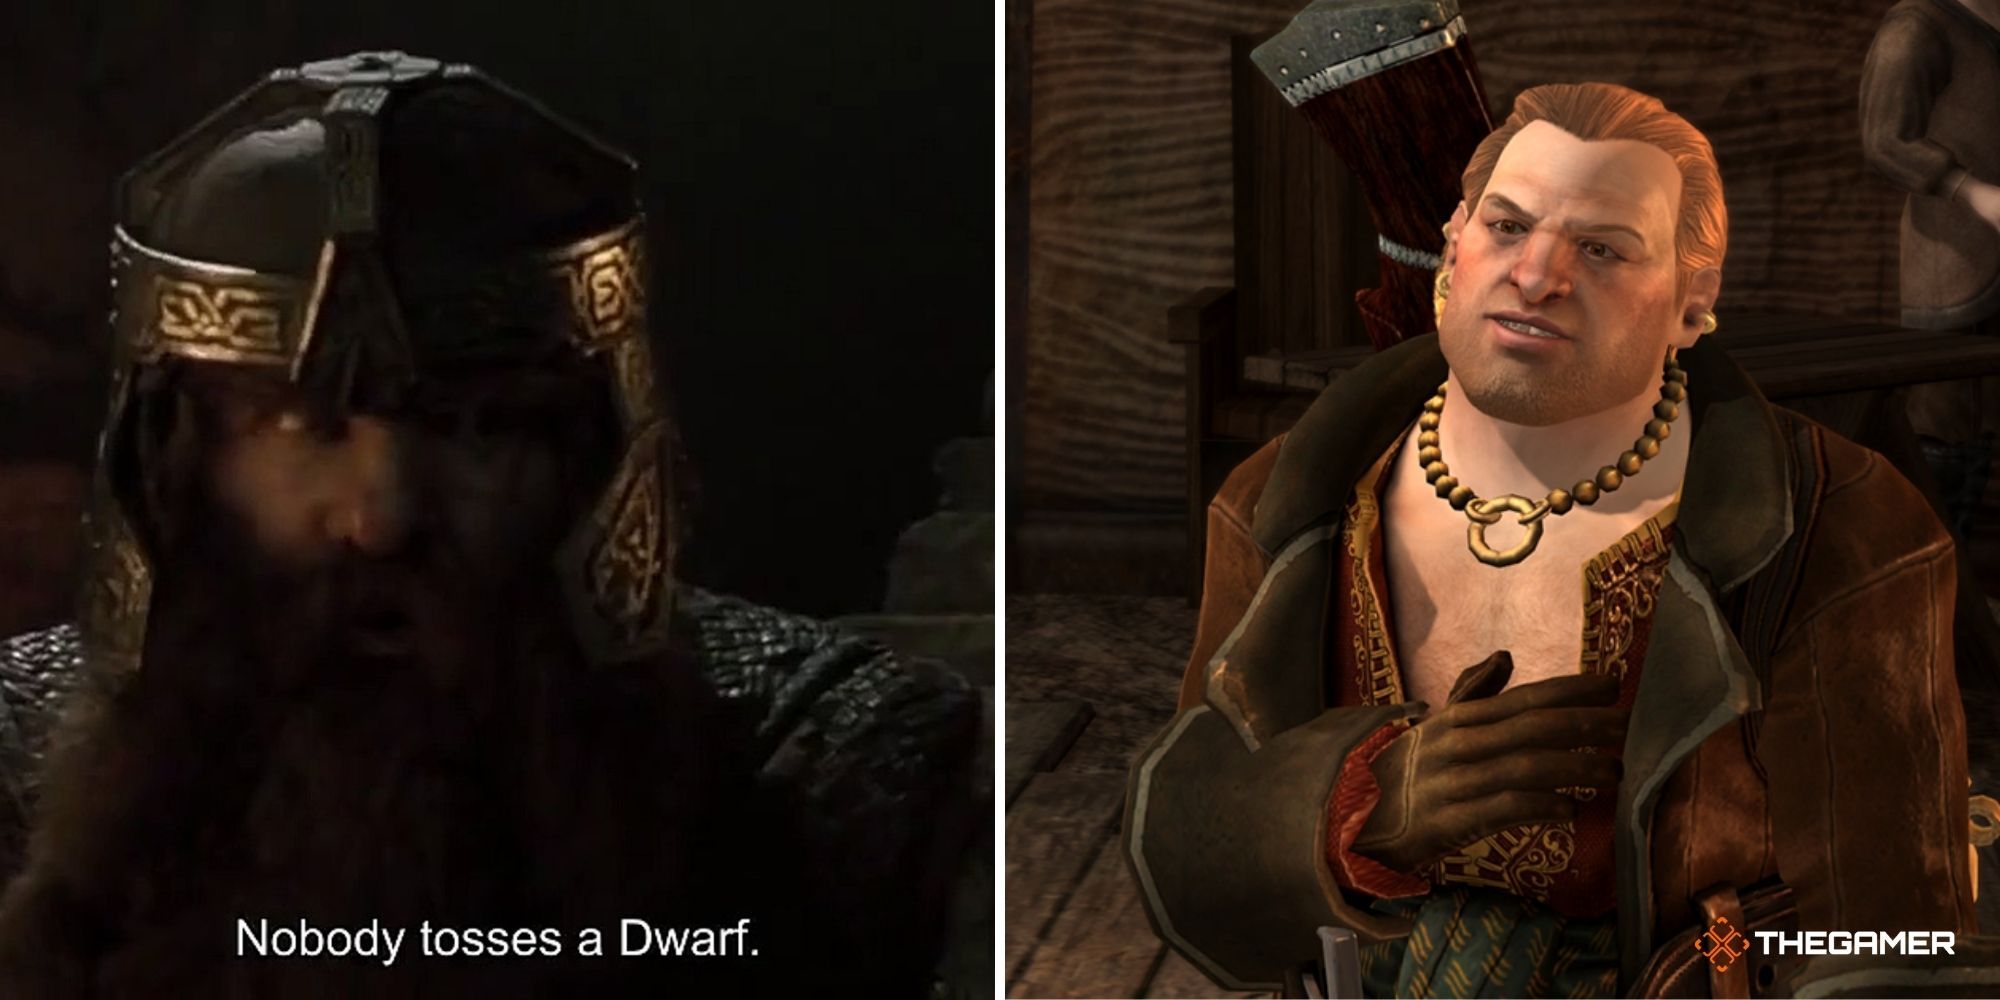 Gimli from the Lord of the Rings on left, Varric from Dragon Age Inquisition on right